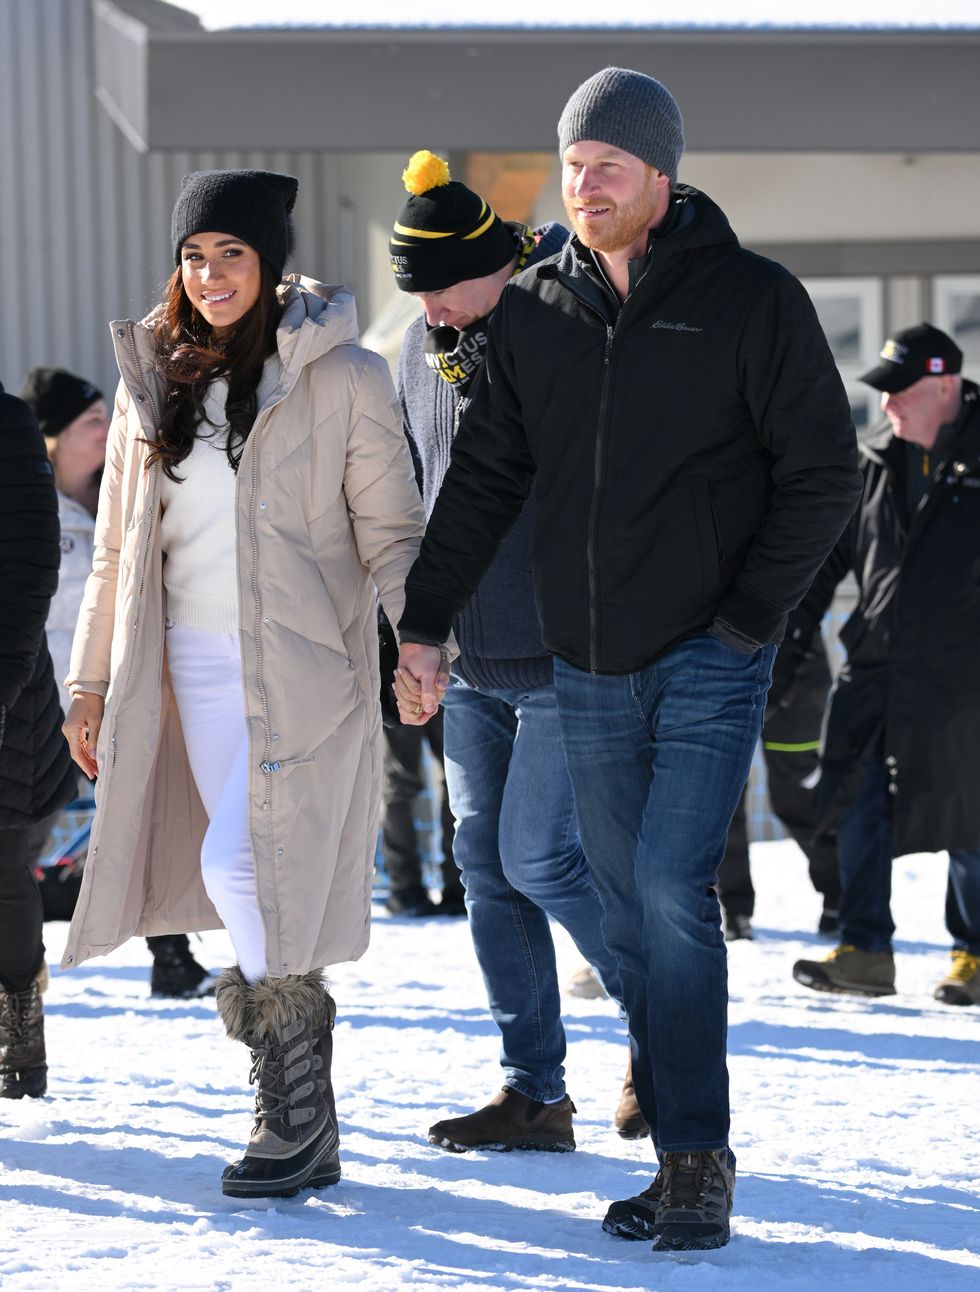 whistler, british columbia february 14 prince harry, duke of sussex and meghan, duchess of sussex attend the invictus games one year to go event on february 14, 2024 in whistler, canada photo by karwai tangwireimage